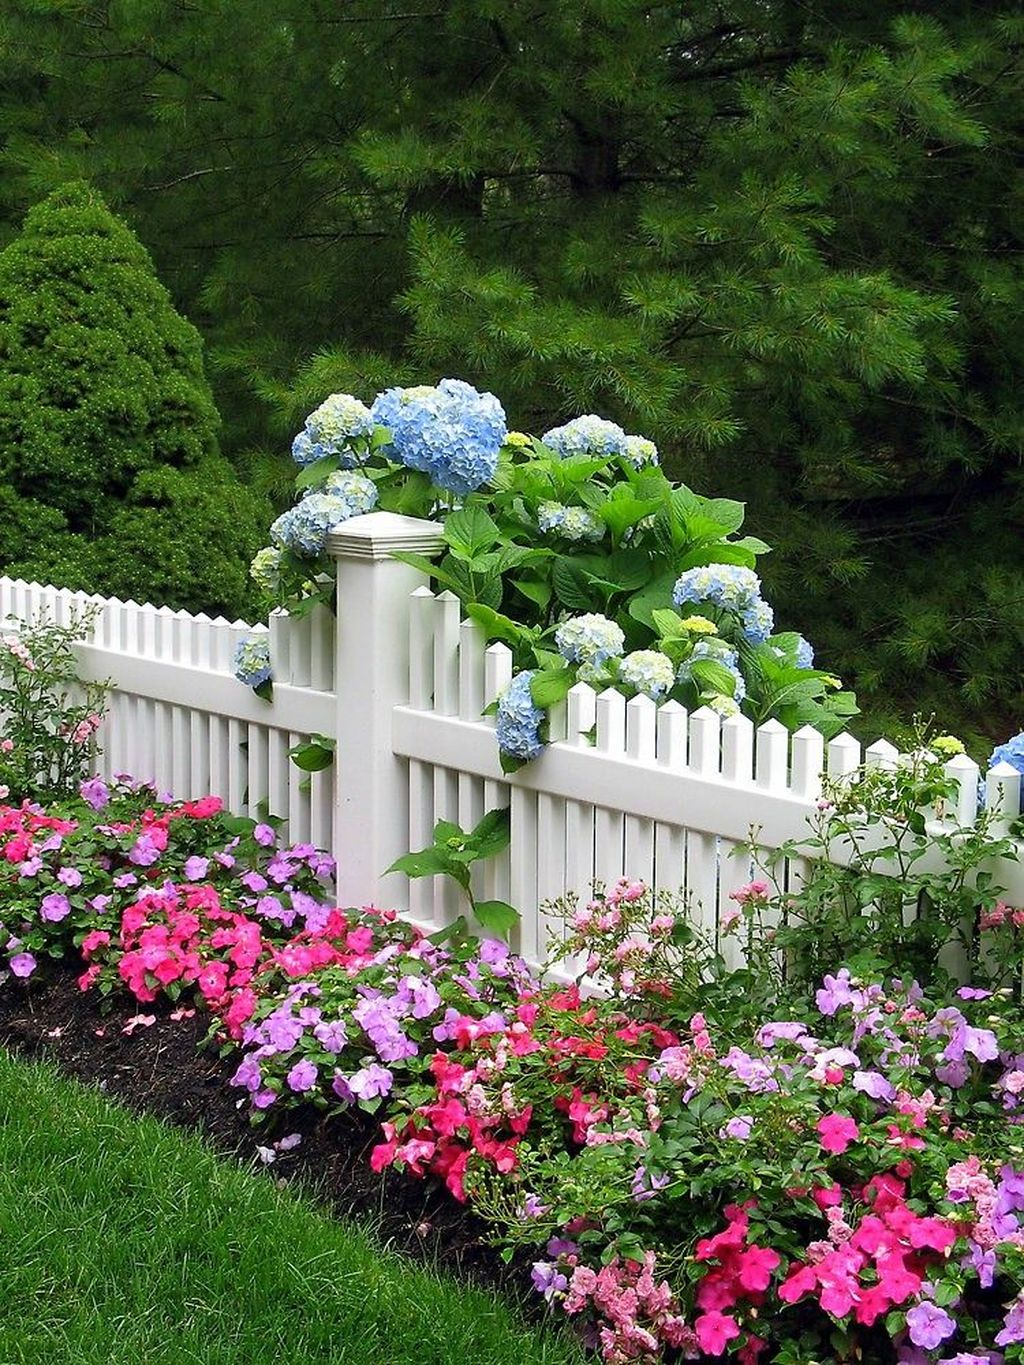 Outstanding Garden Design Ideas With Best Style To Try01